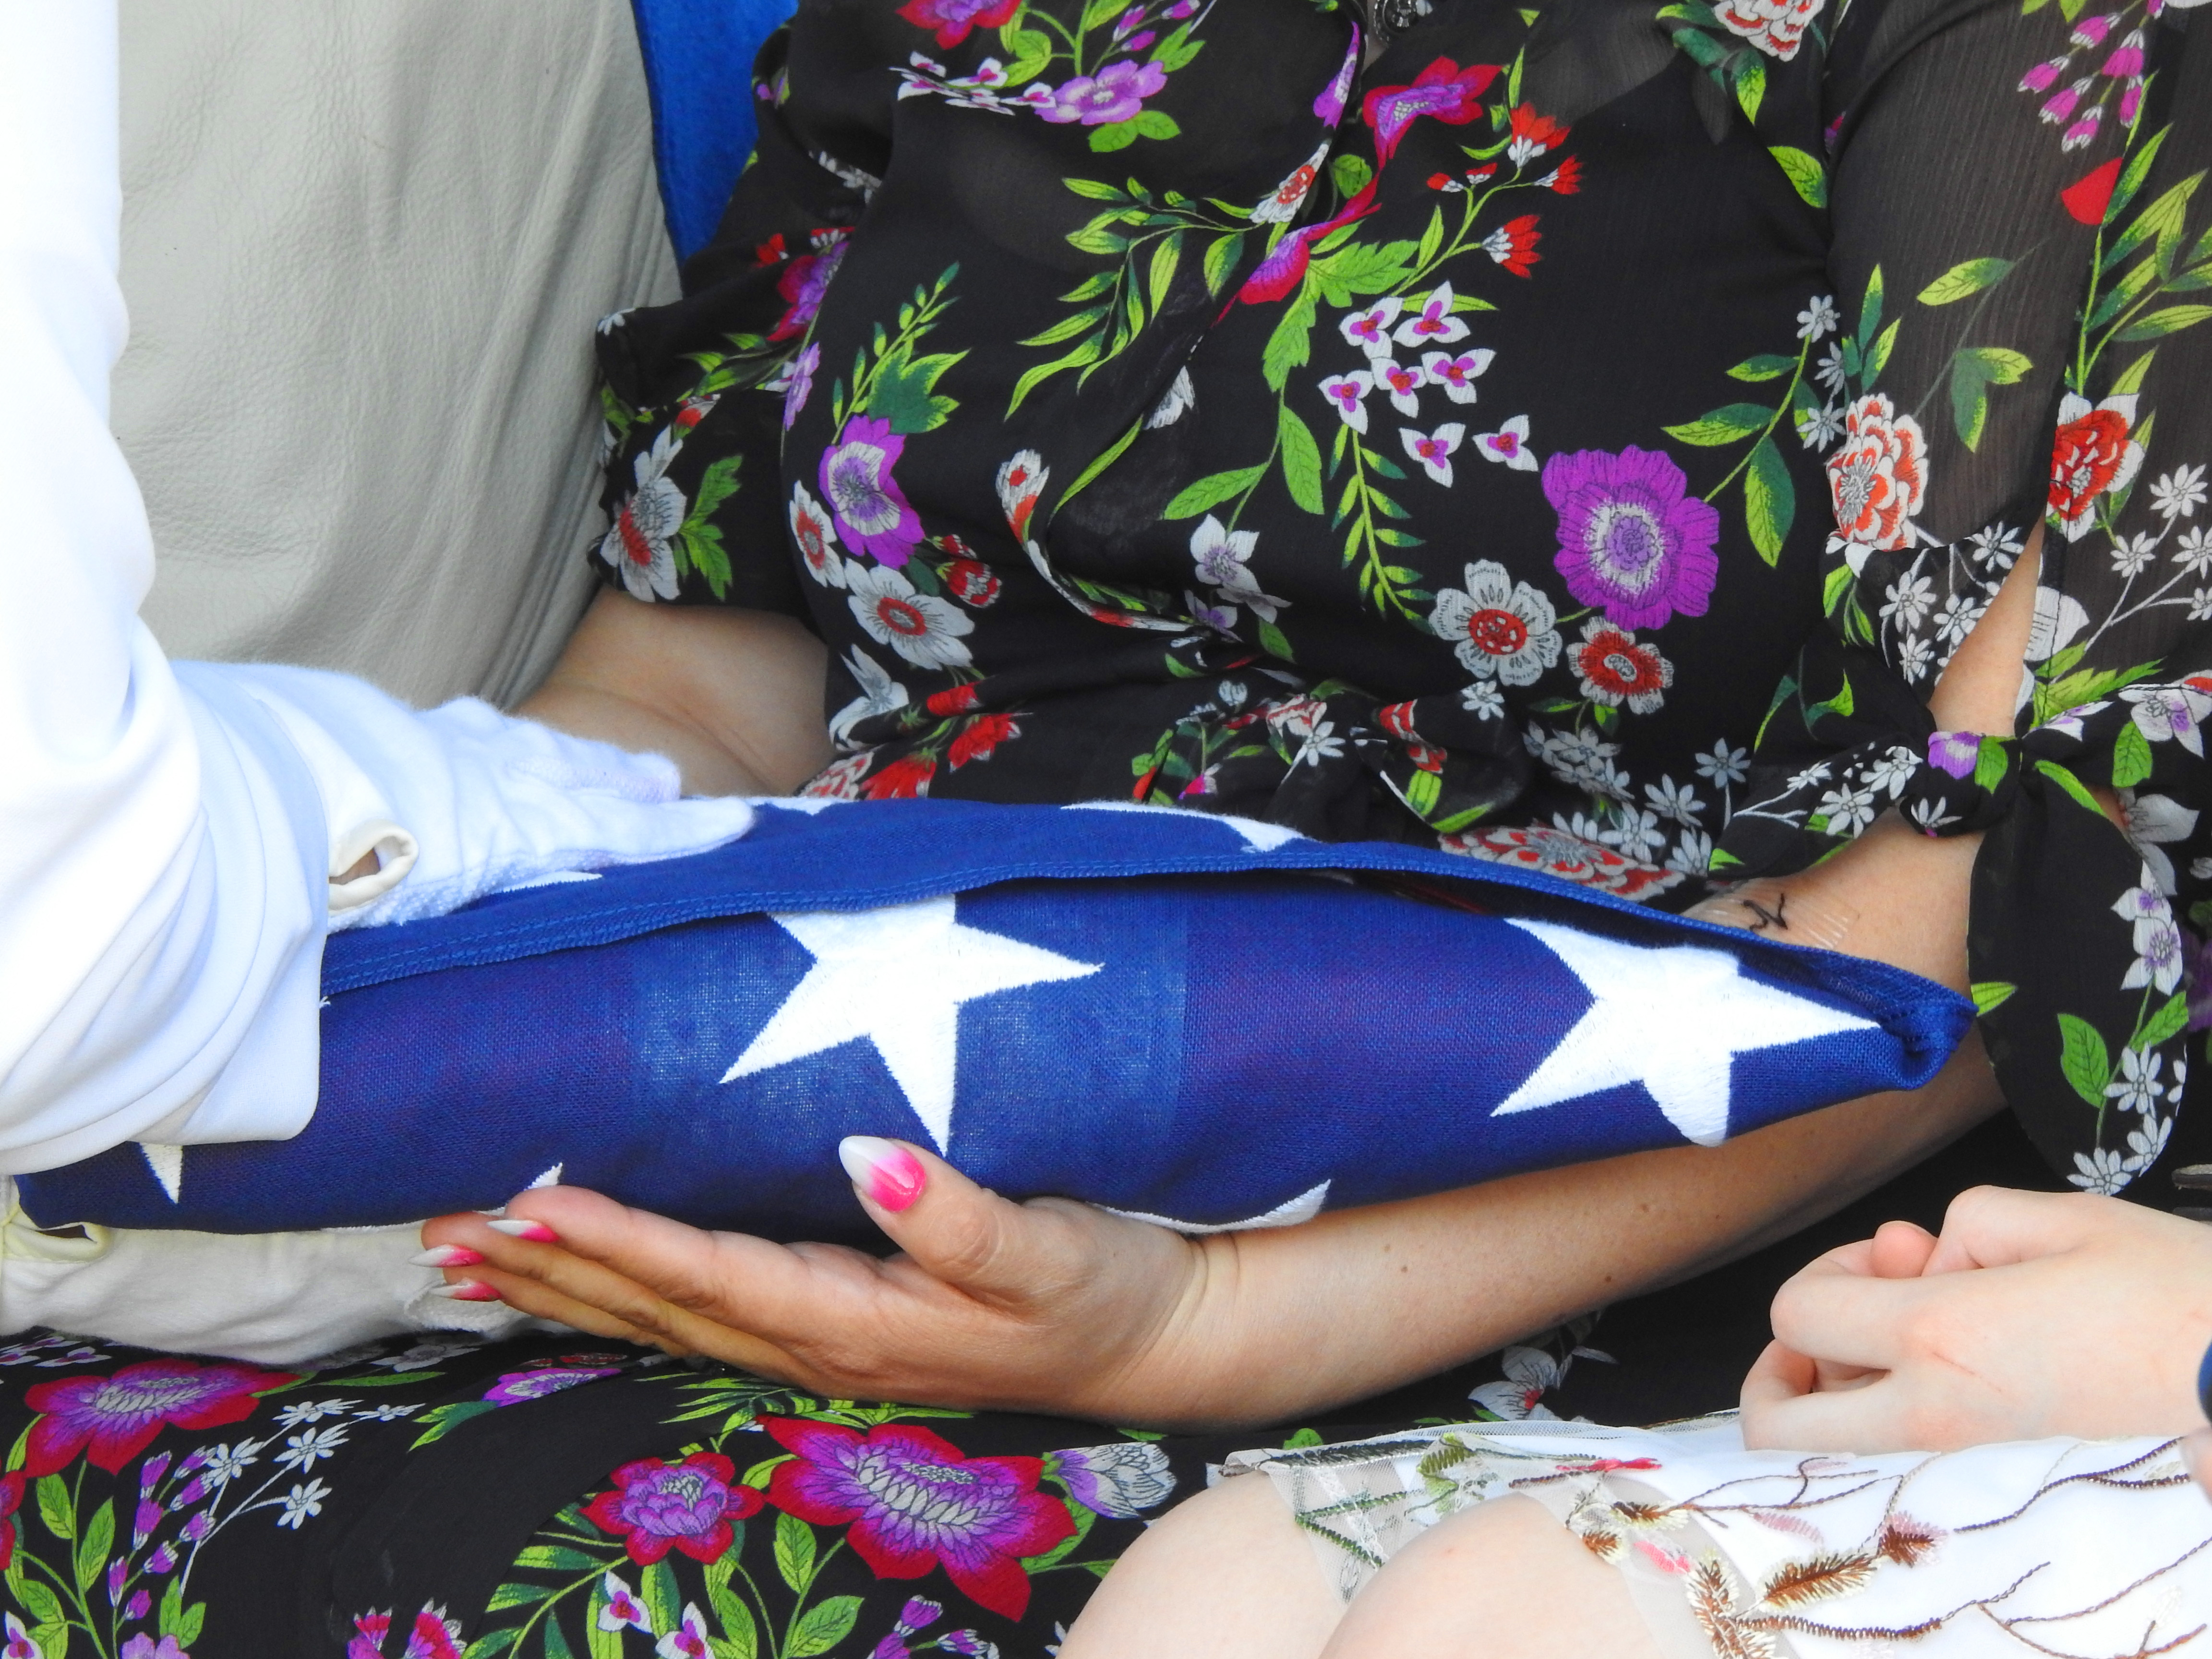 VFW flag presented to widow.